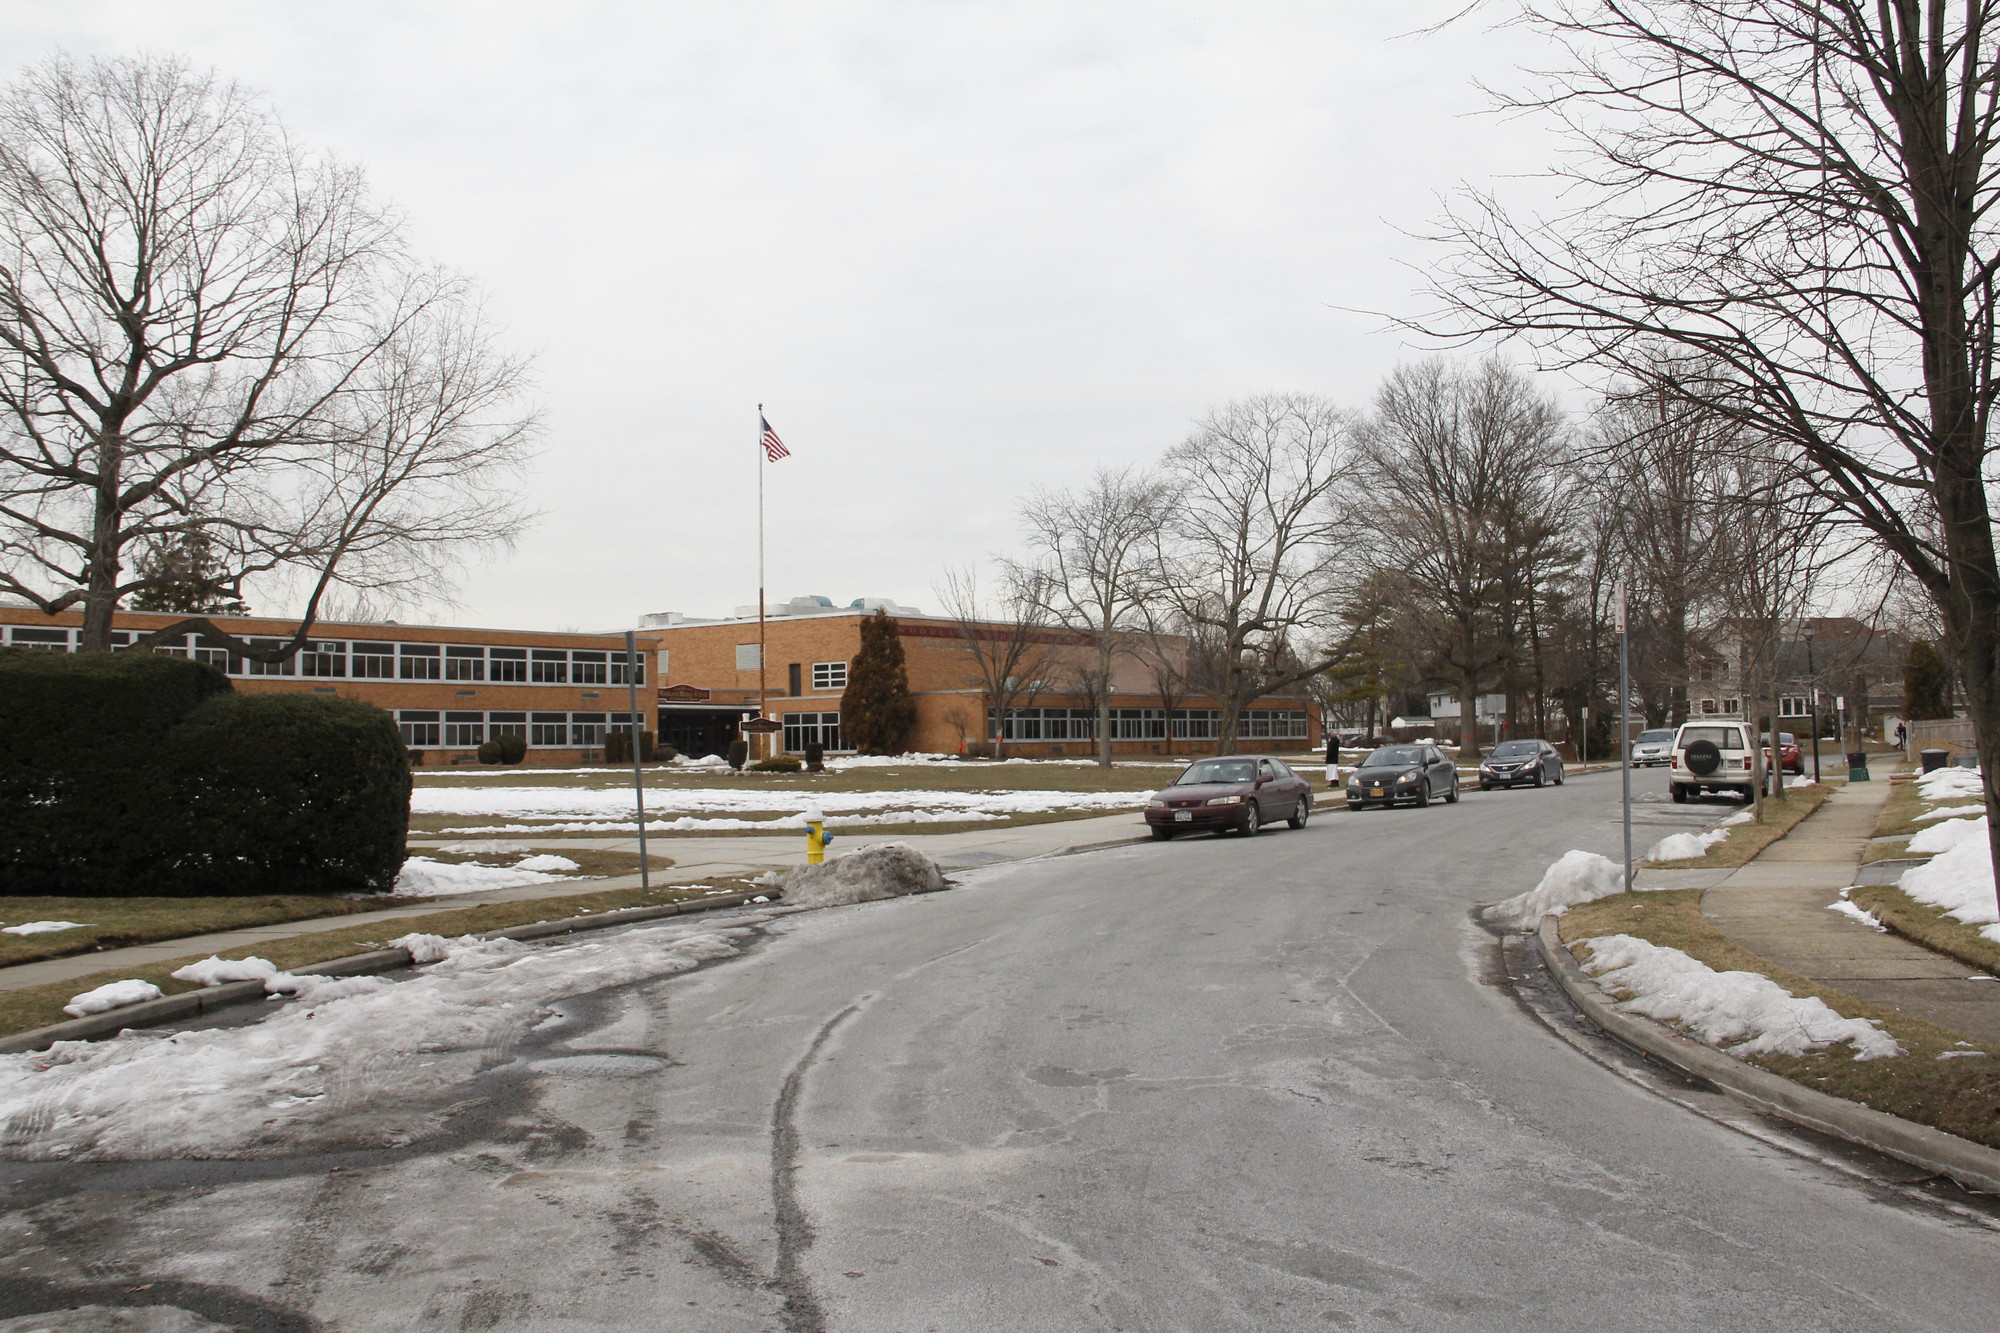 Wenwood Drive, outside Woodland Middle School, pictured above in March, was the site of the 2007 picketing incident.